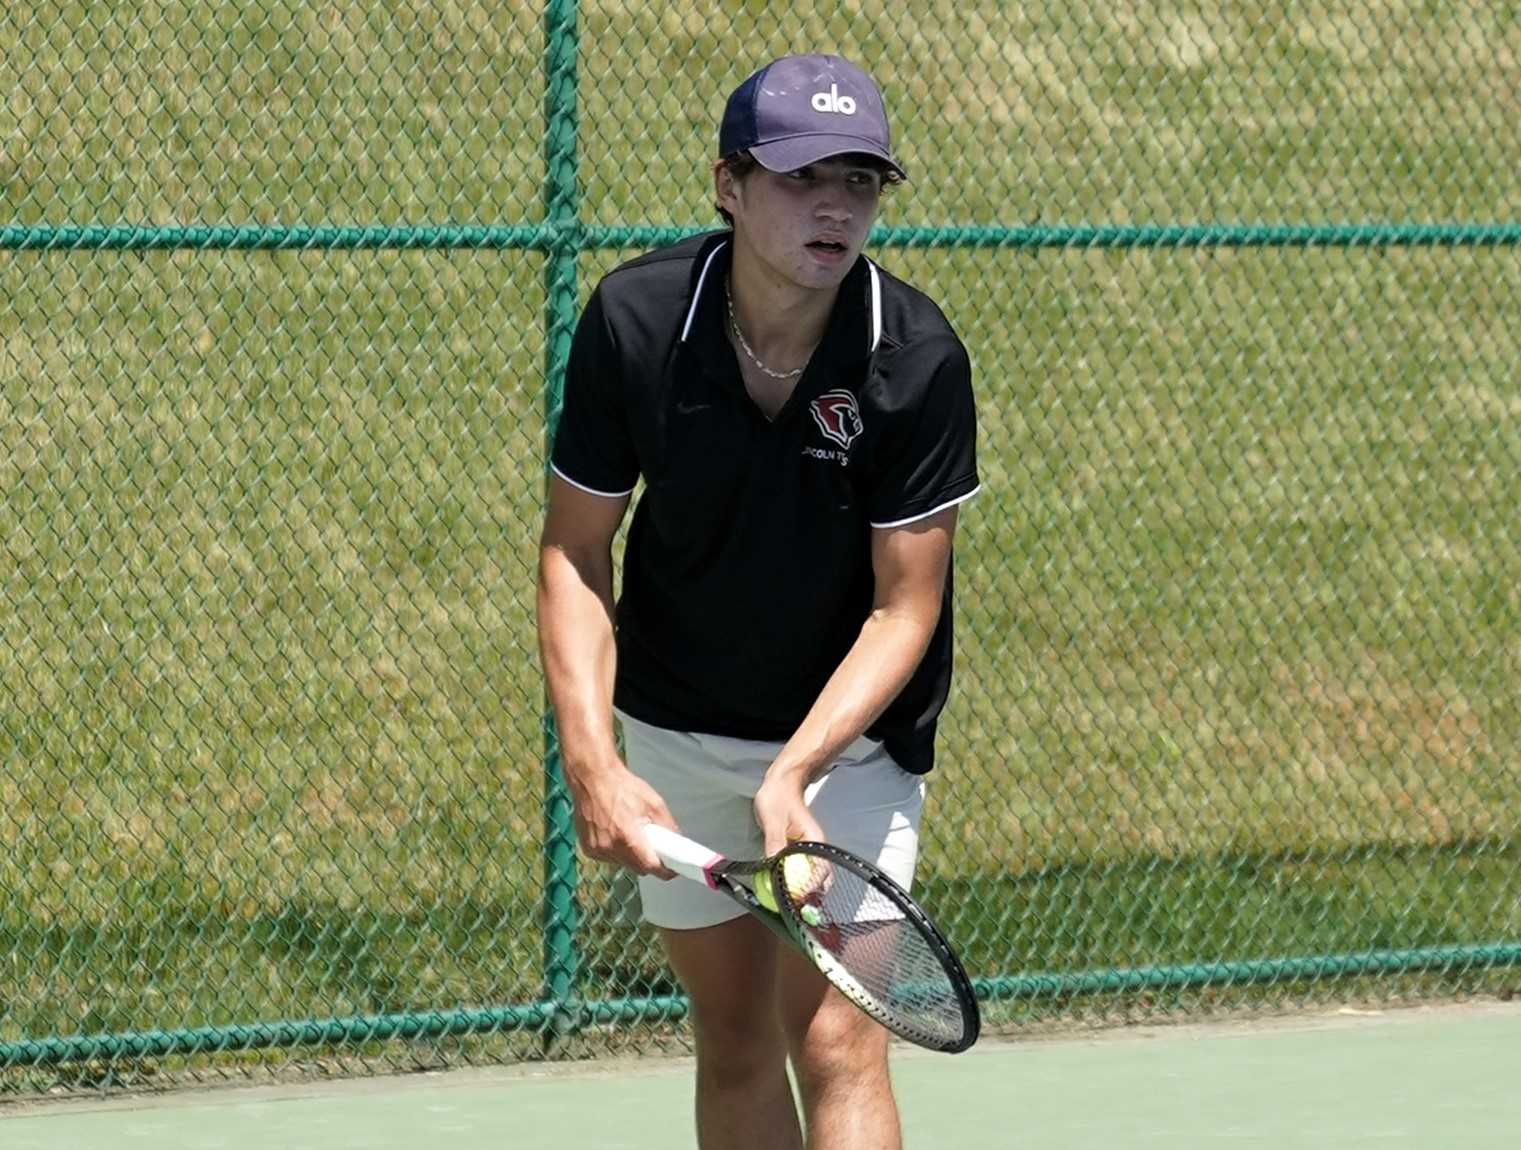 San Diego-bound Lincoln senior Will Semler is the top seed in the 6A boys tennis tournament this week. (Photo by Jon Olson)